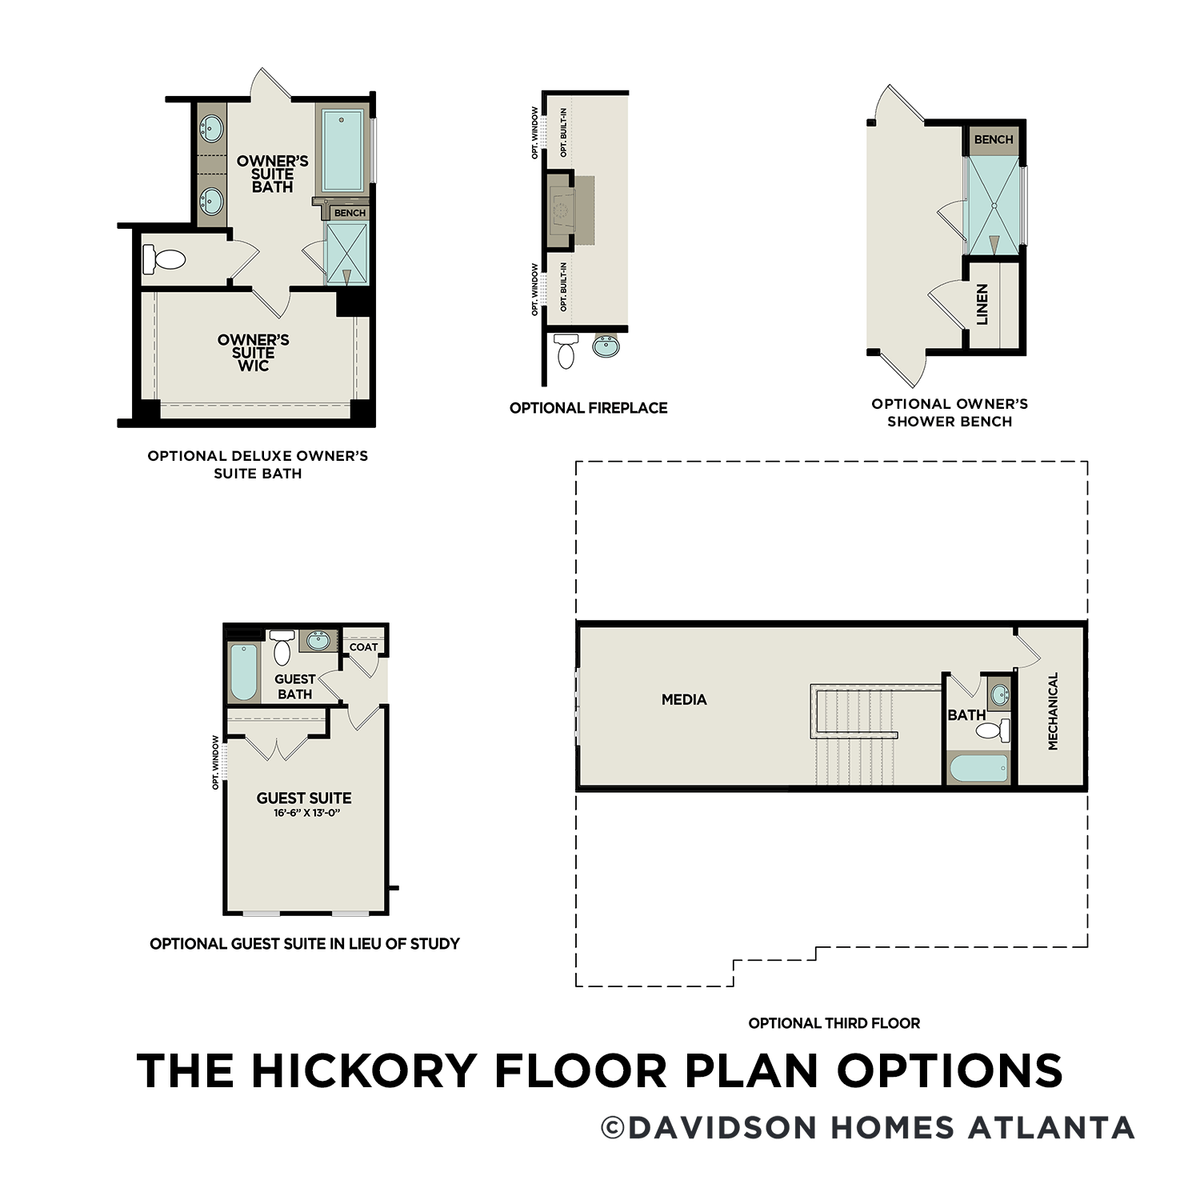 4 - The Hickory A buildable floor plan layout in Davidson Homes' Riverwood community.